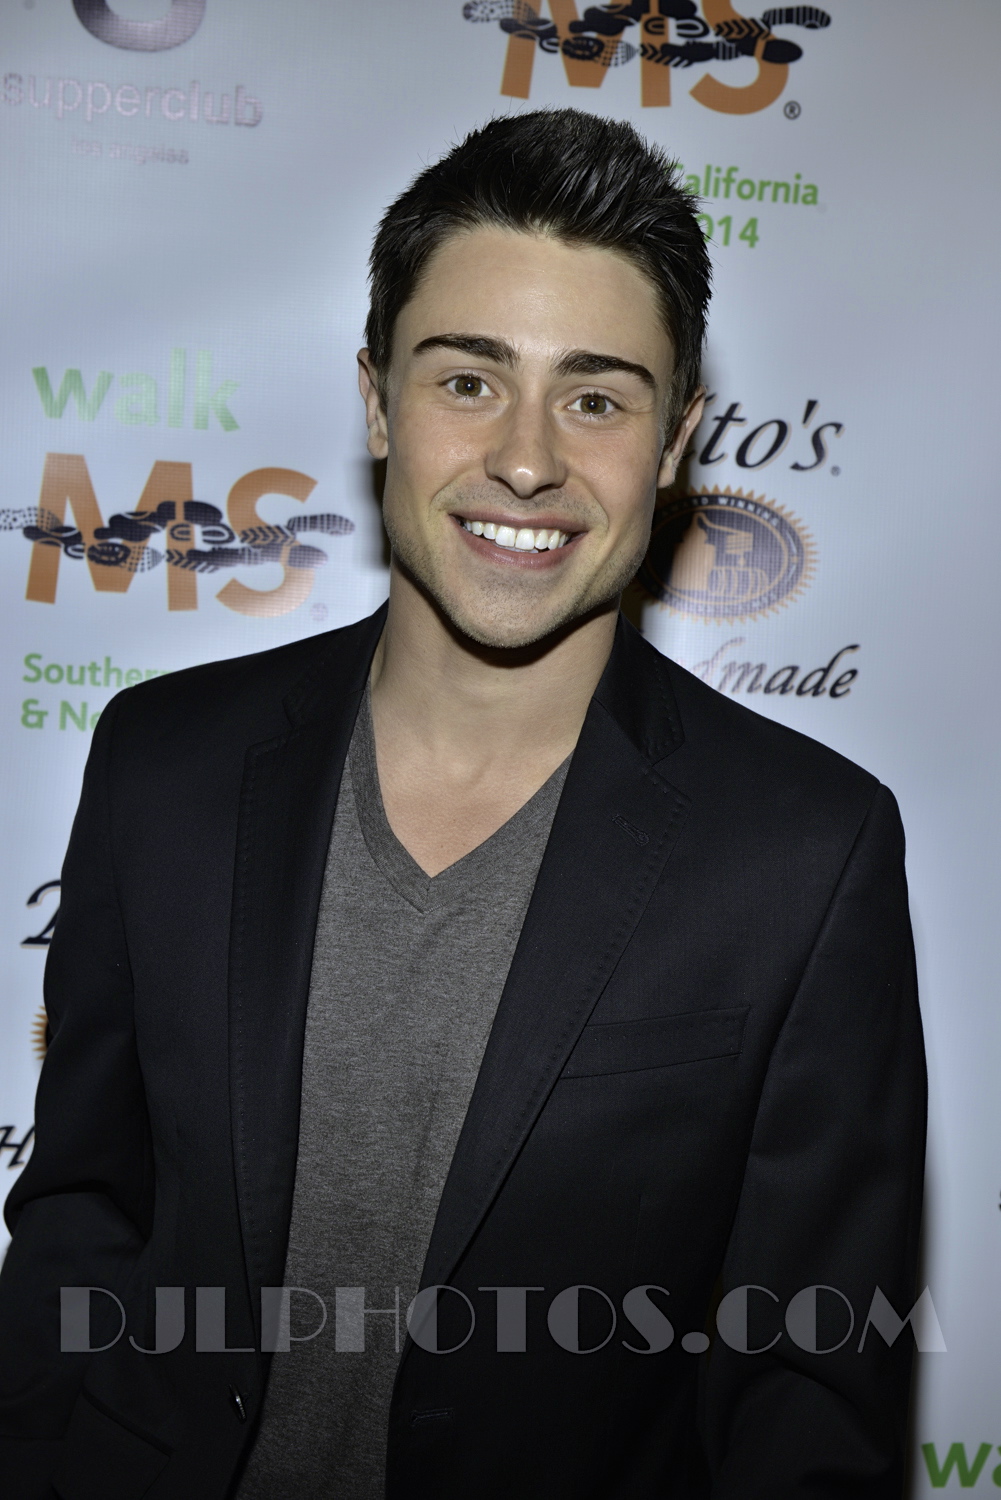 HOLLYWOOD, CA - Actor Paris Dylan Attends 2014 LA Celebrity MS Walk Kick Off Event (Photo by DJL)